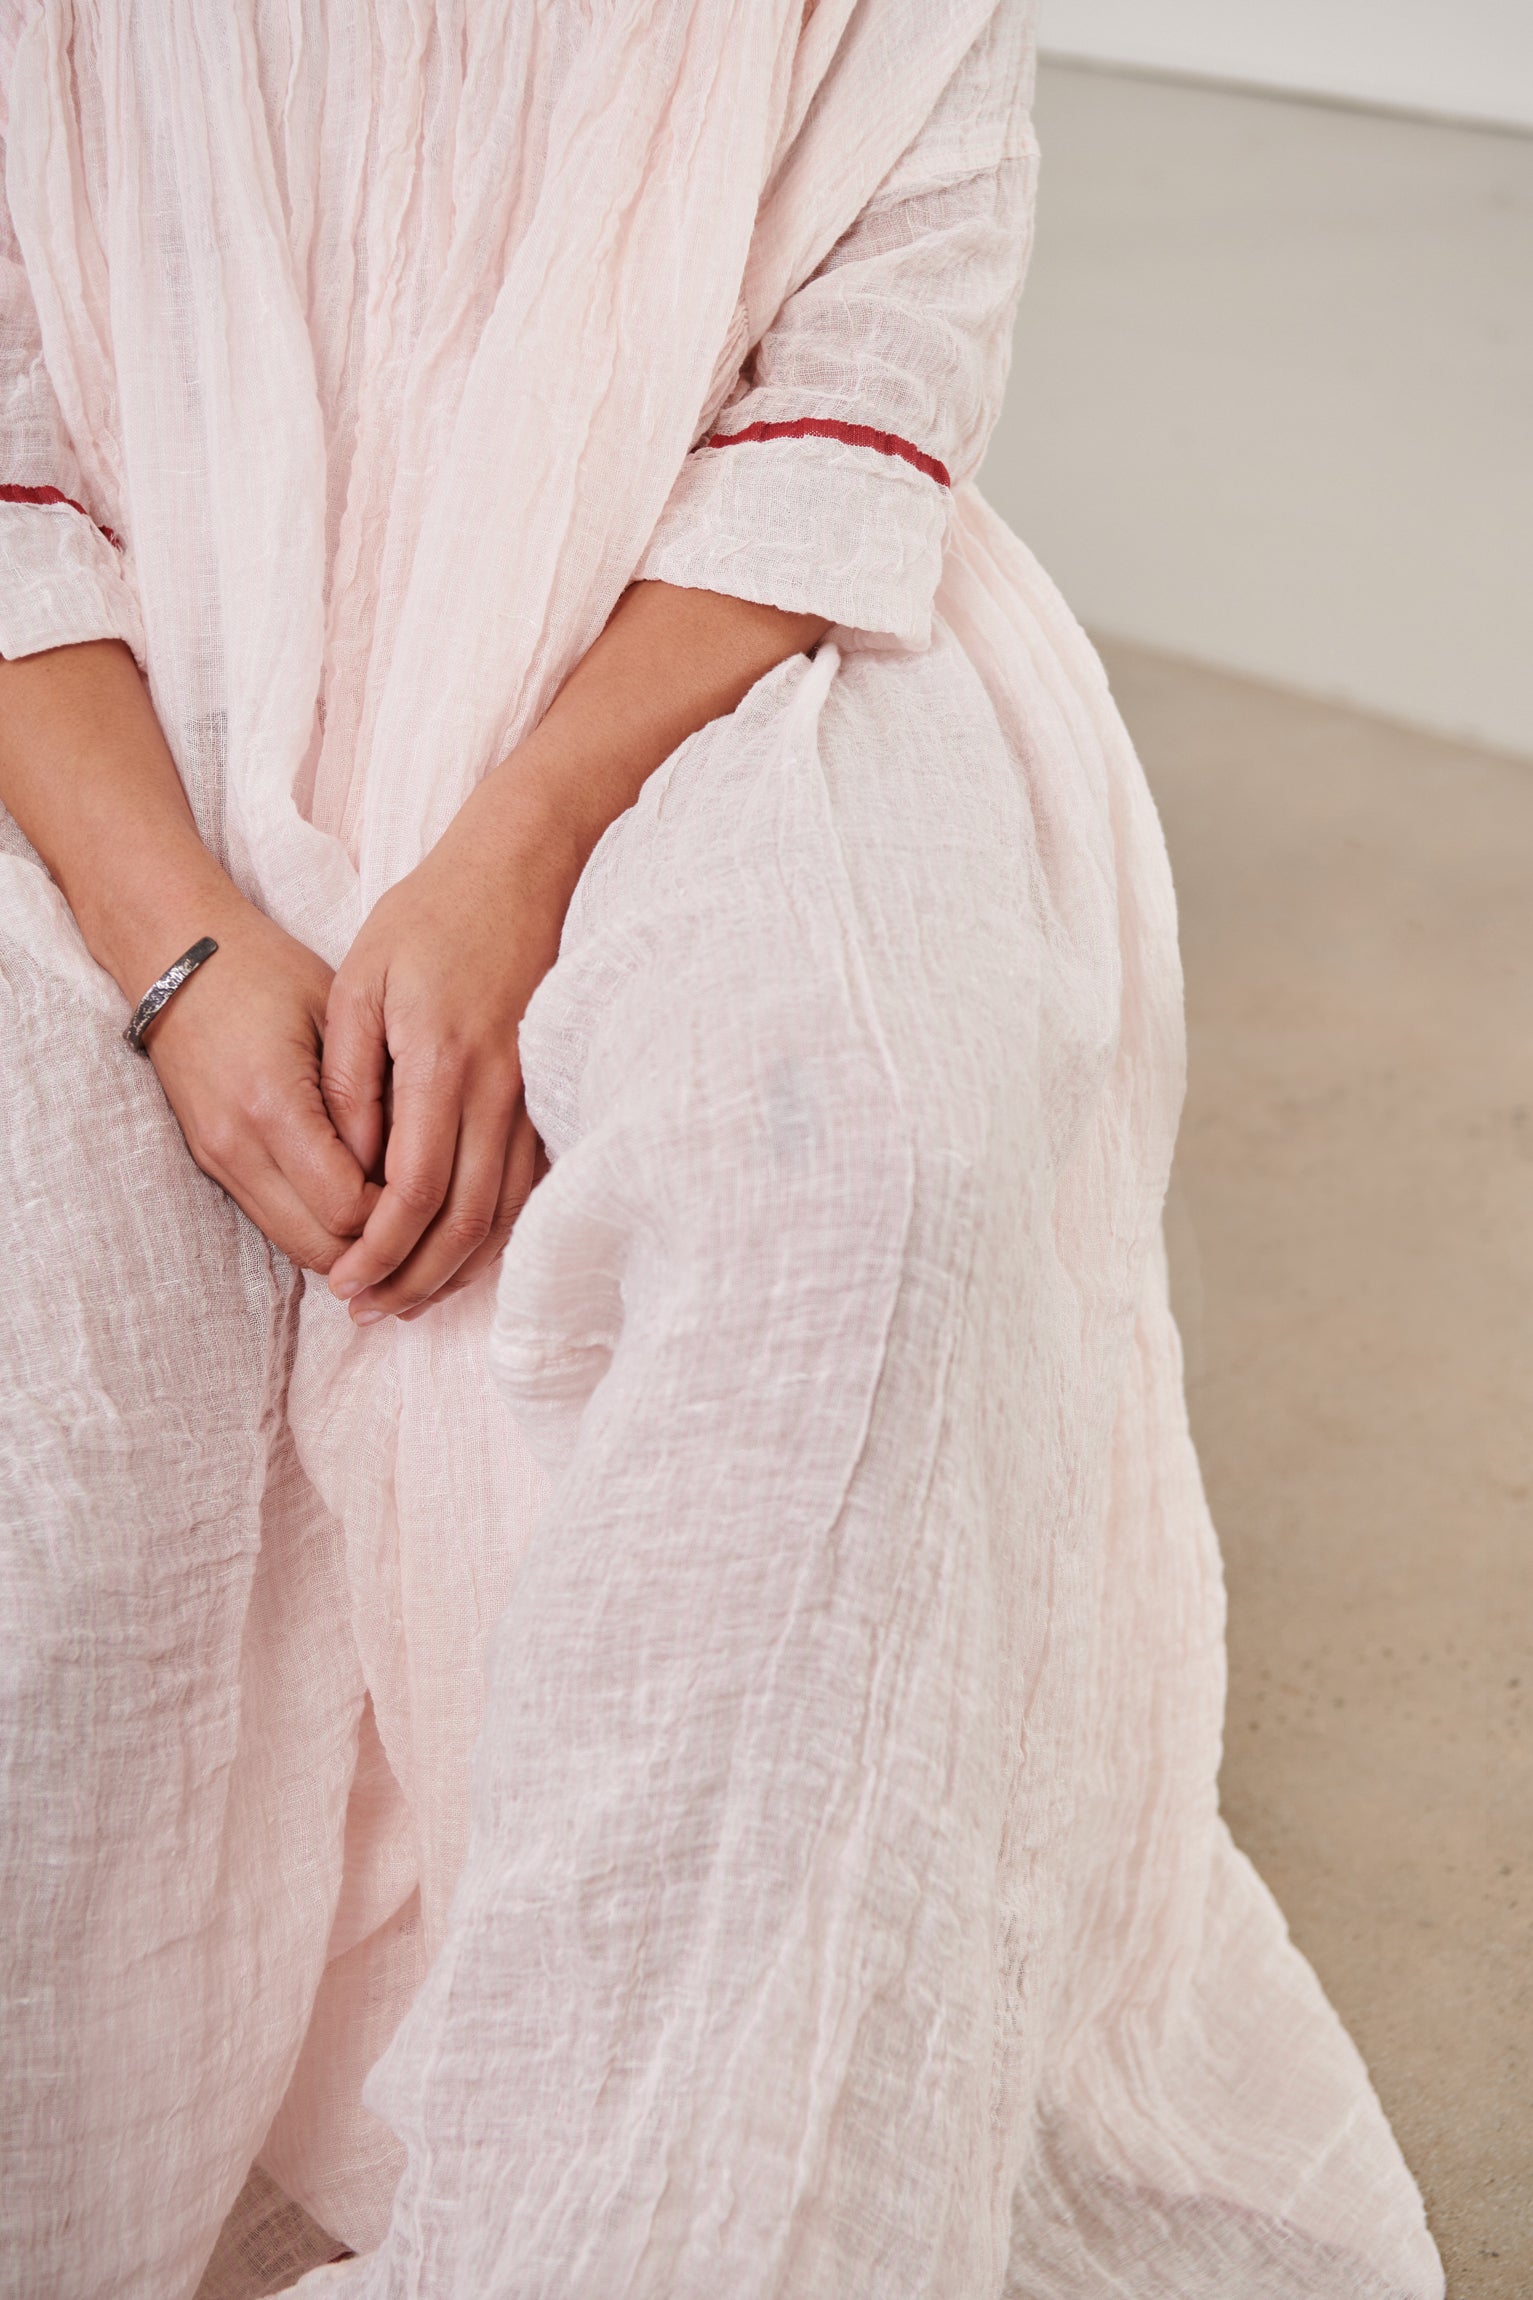 A MegbyDesign model is wearing a pink soft gauze linen tunic dress with a red trim